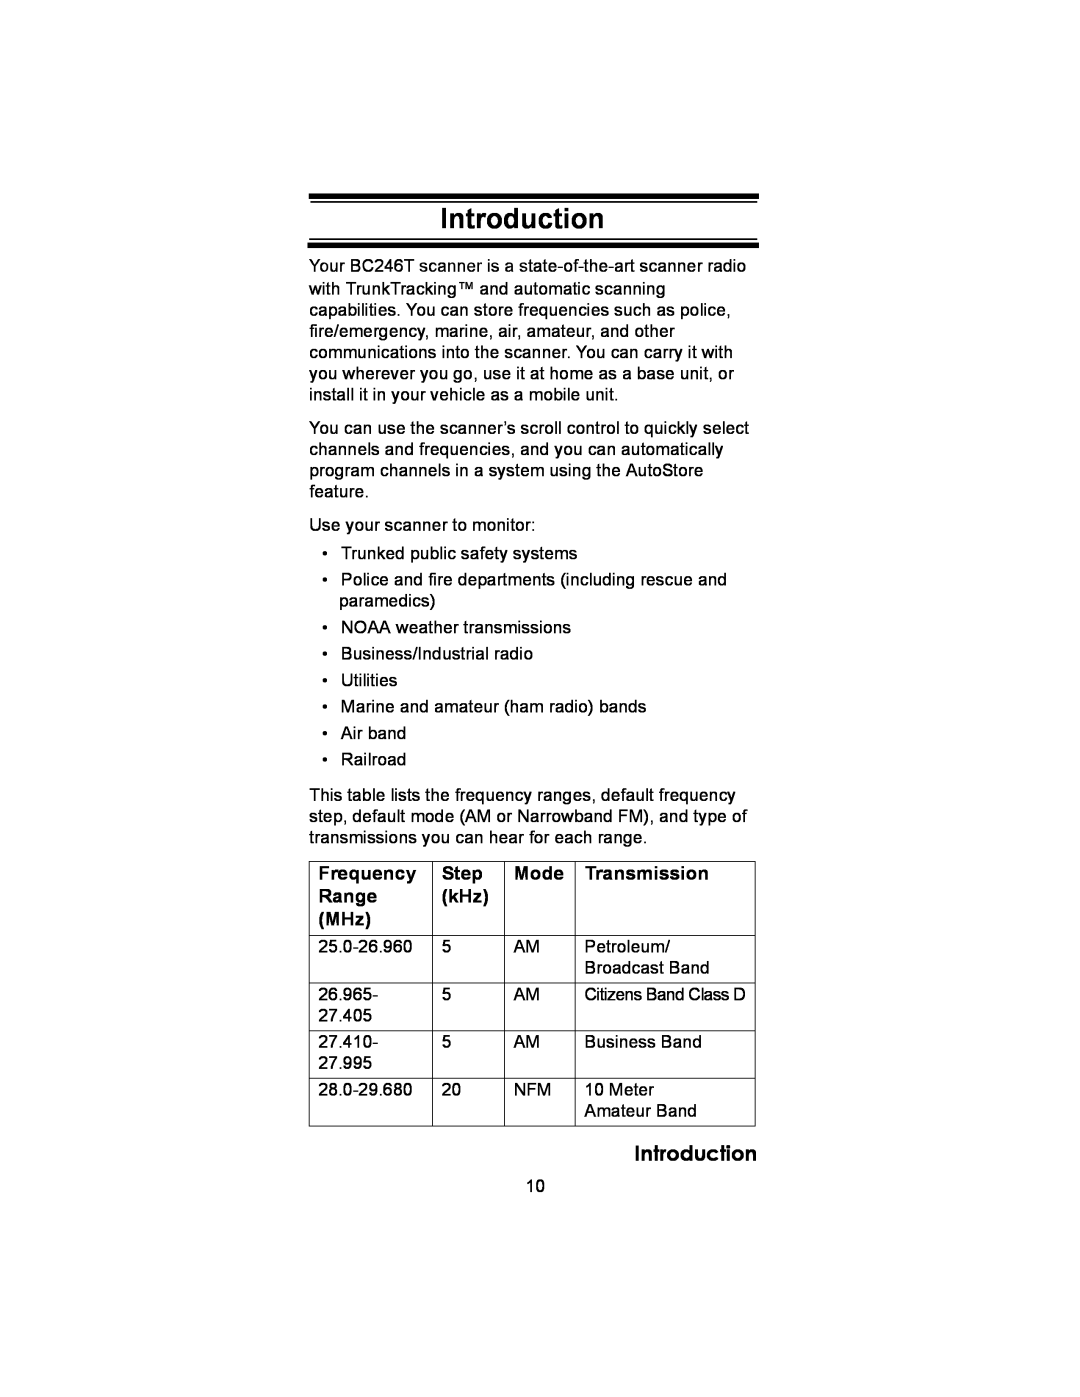 Uniden BC246T owner manual Introduction, Frequency, Step, Mode, Transmission, Range 